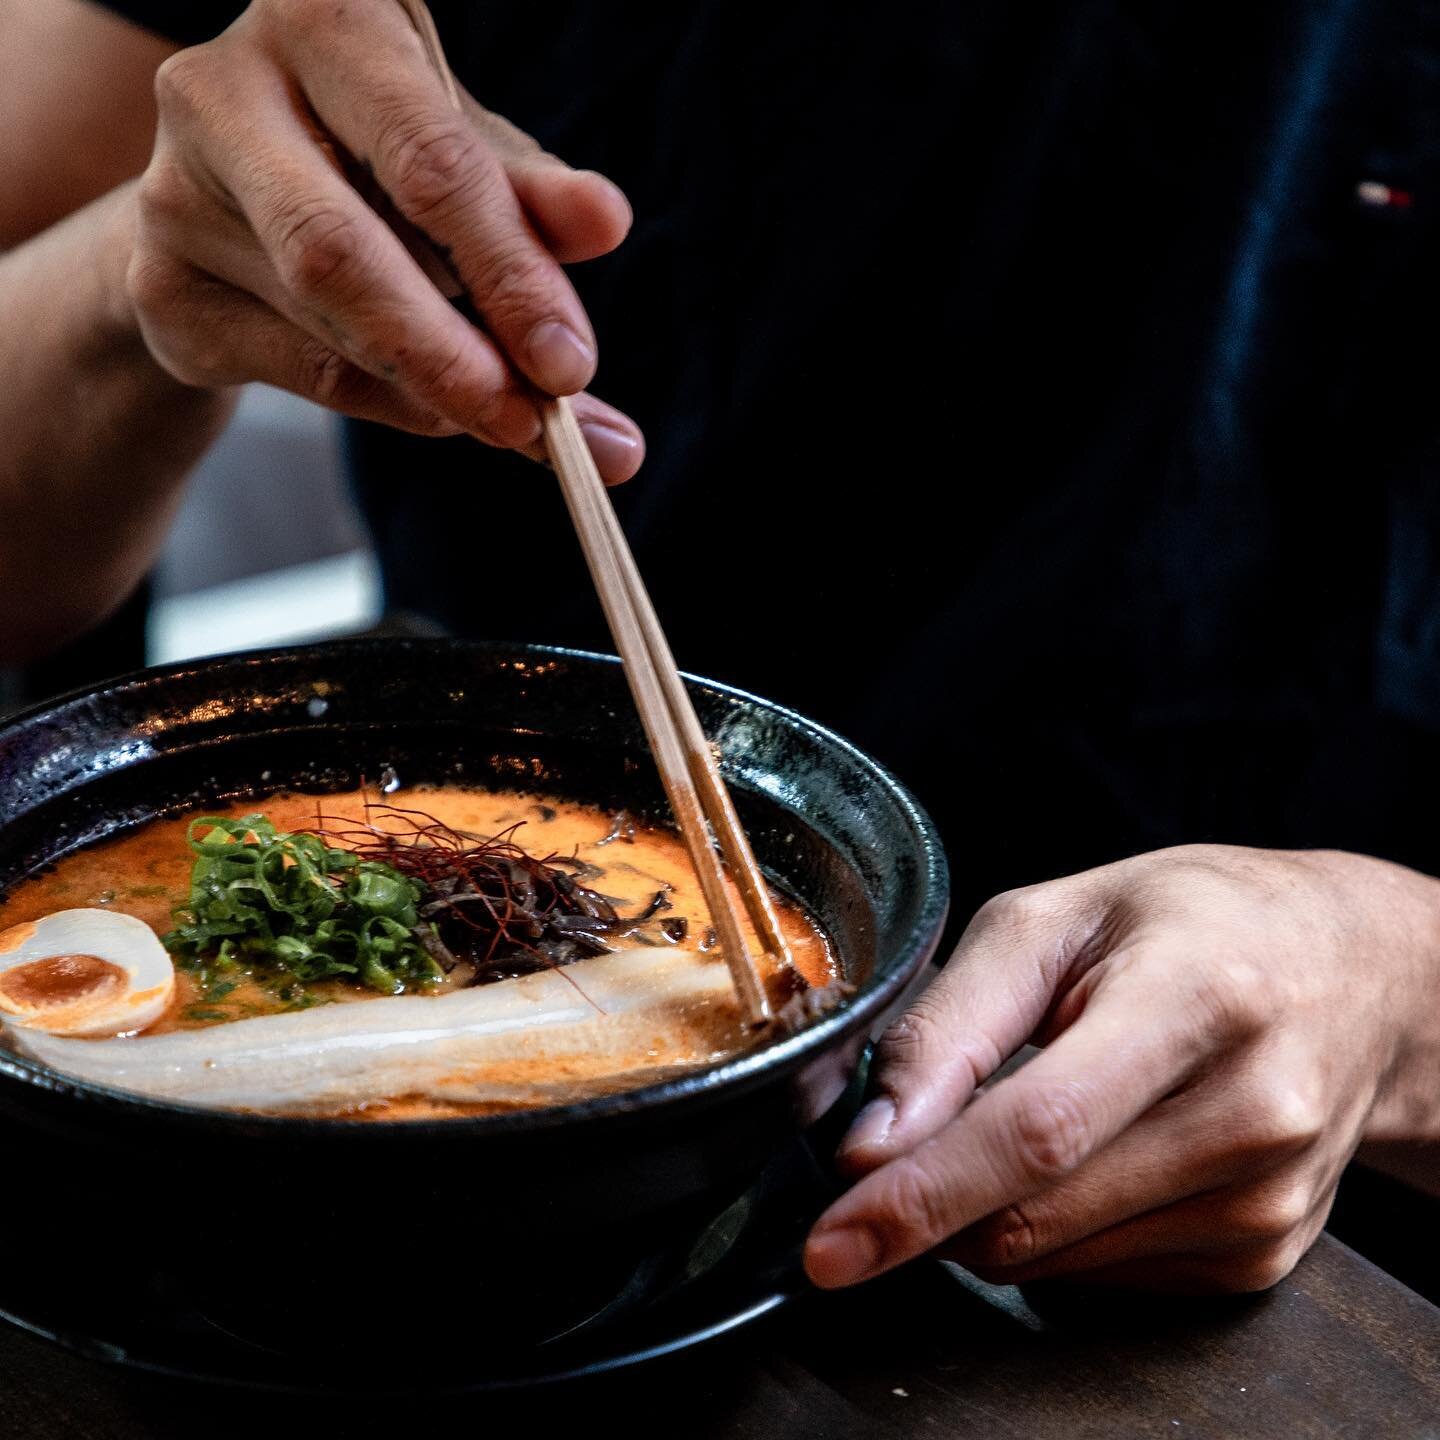 When a good bowl of ramen hits the spot 👌
Check out our updated trading hours below for dine-in and takeaway:
⠀
⏰ SUN-THU
11:30AM-3PM, 5PM-10PM

⏰ FRI-SAT
11:30AM-3PM, 5PM-11PM